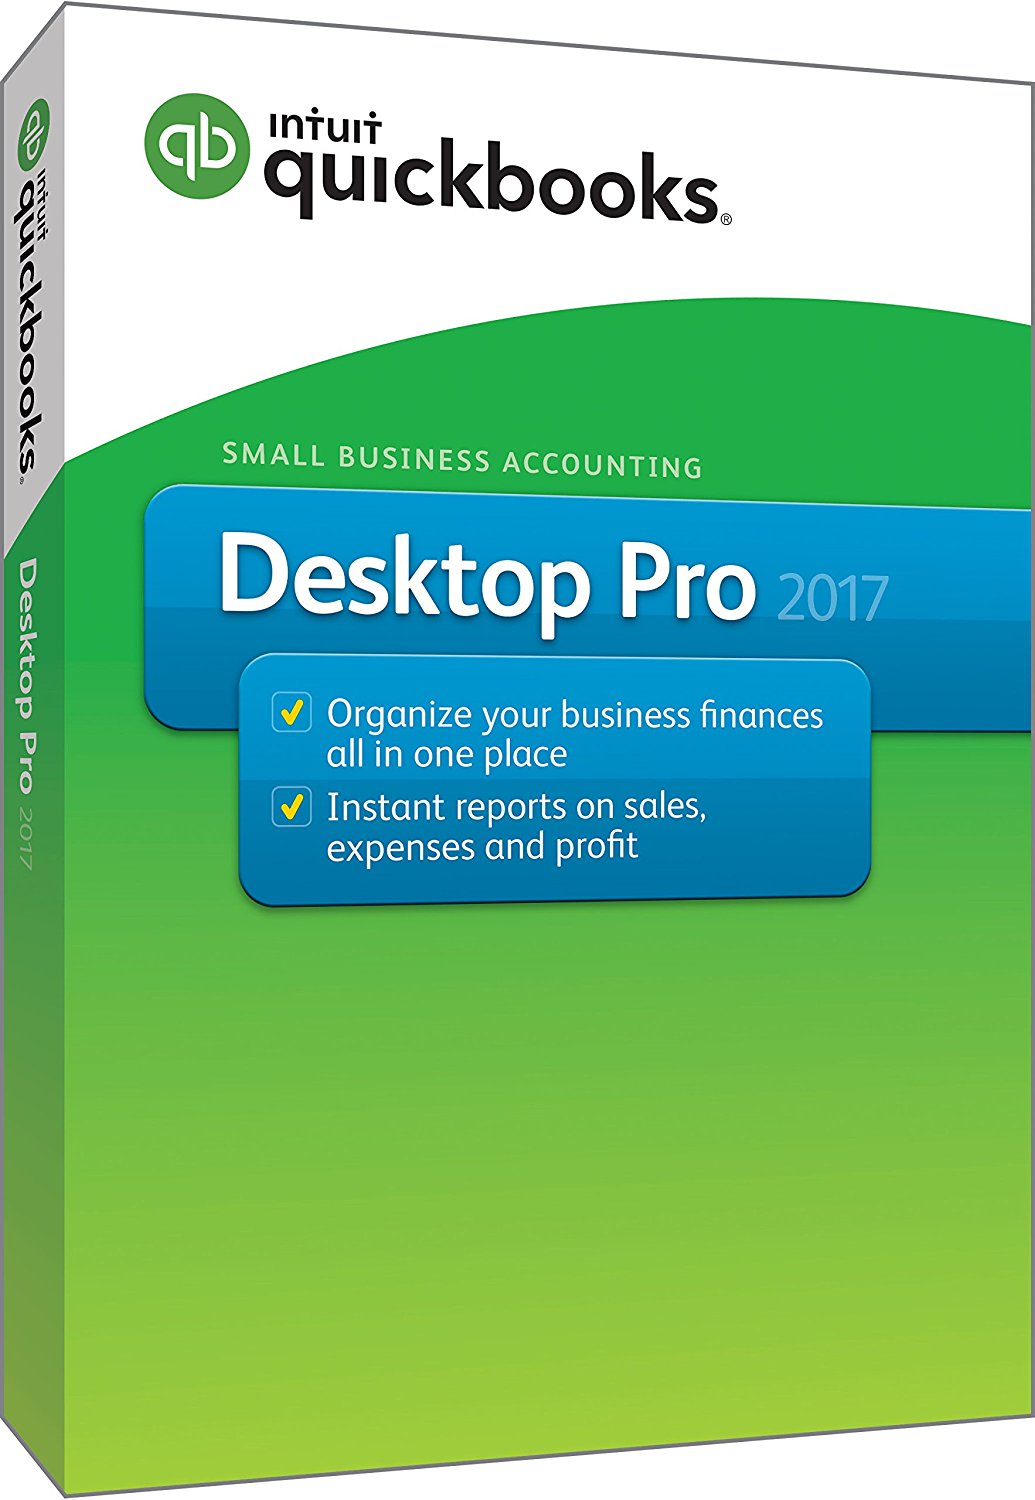 Intuit Quickbooks Desktop Pro 2017 Software Small Business Accounting 139 99 Ac Free Shipping